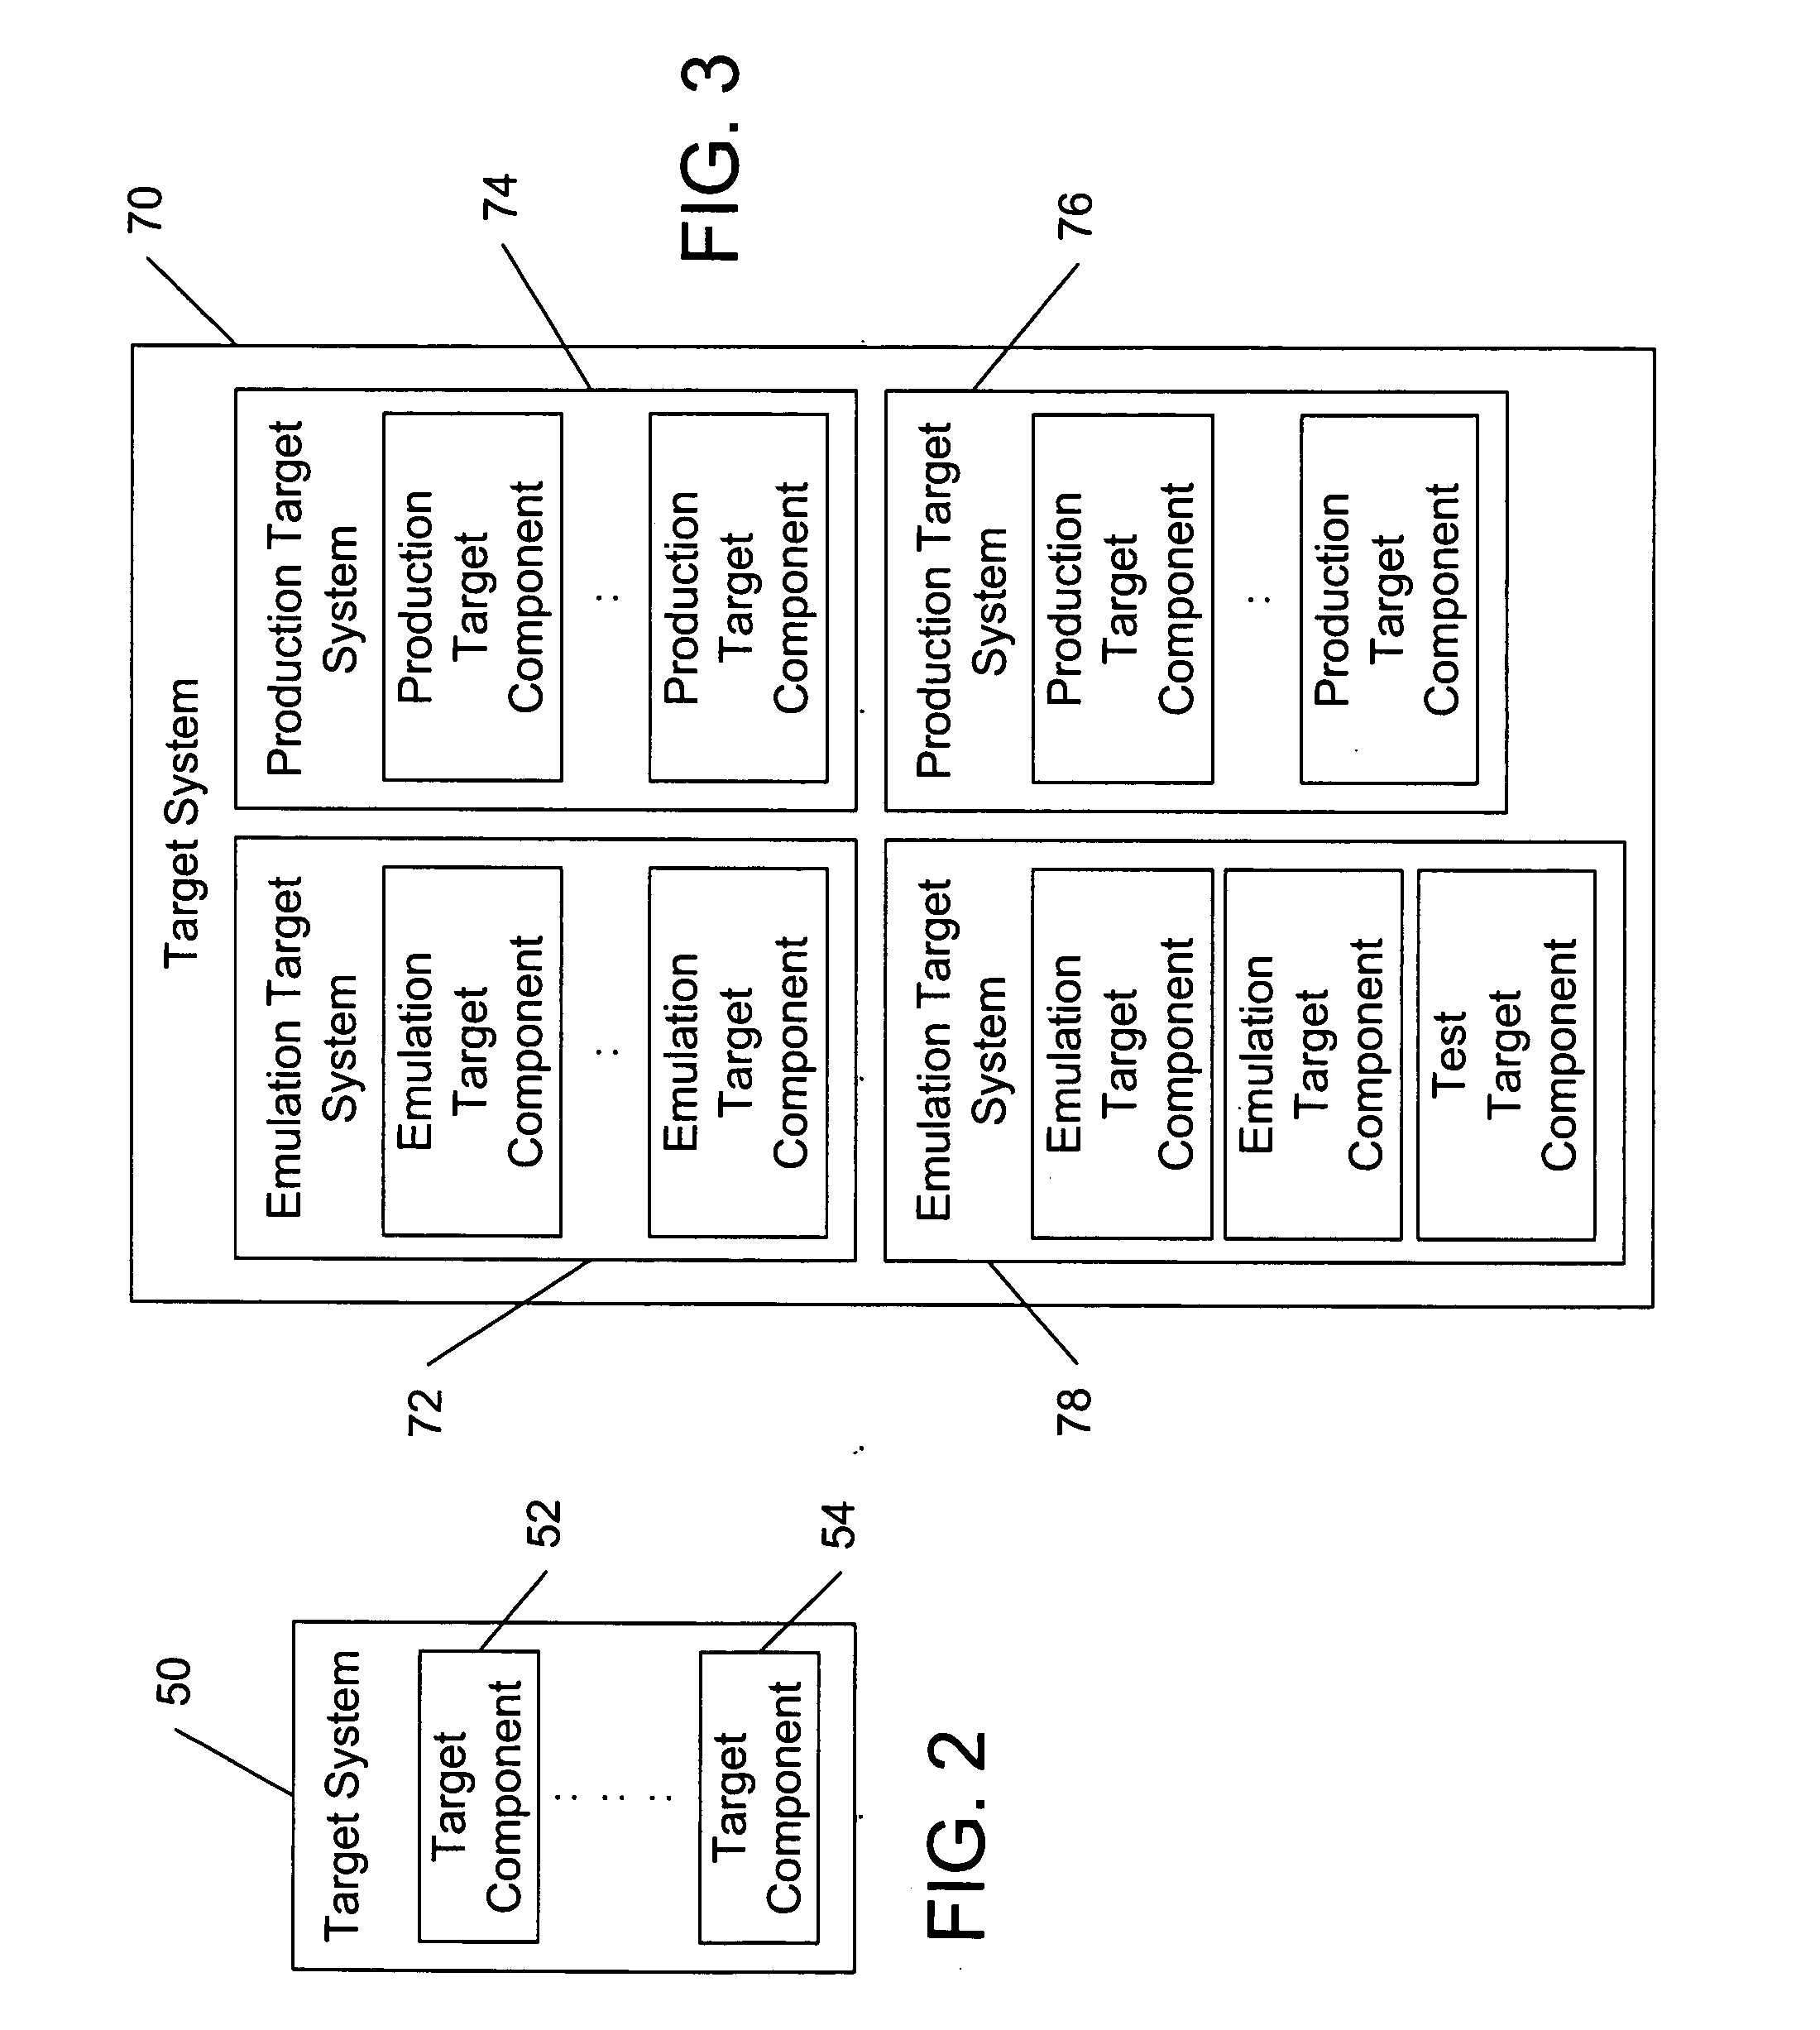 System and method for rapid design, prototyping, and implementation of distributed scalable architecture for task control and automation